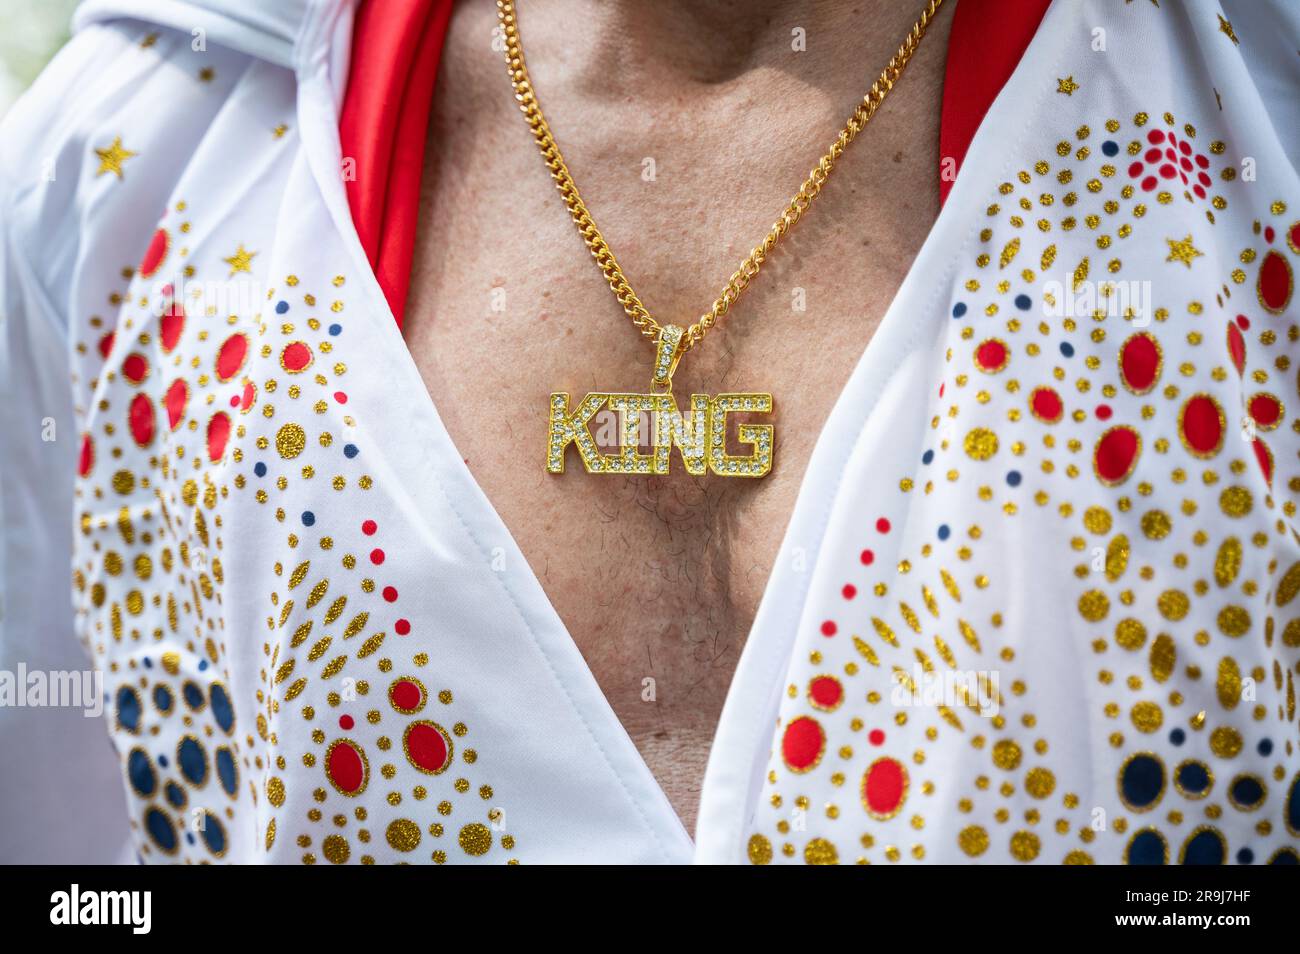 28.05.2023, Berlin, Germany, Europe - Close-up of the necklace with 'King' pendant of an Elvis impersonator at the Carnival of Cultures in Kreuzberg. Stock Photo